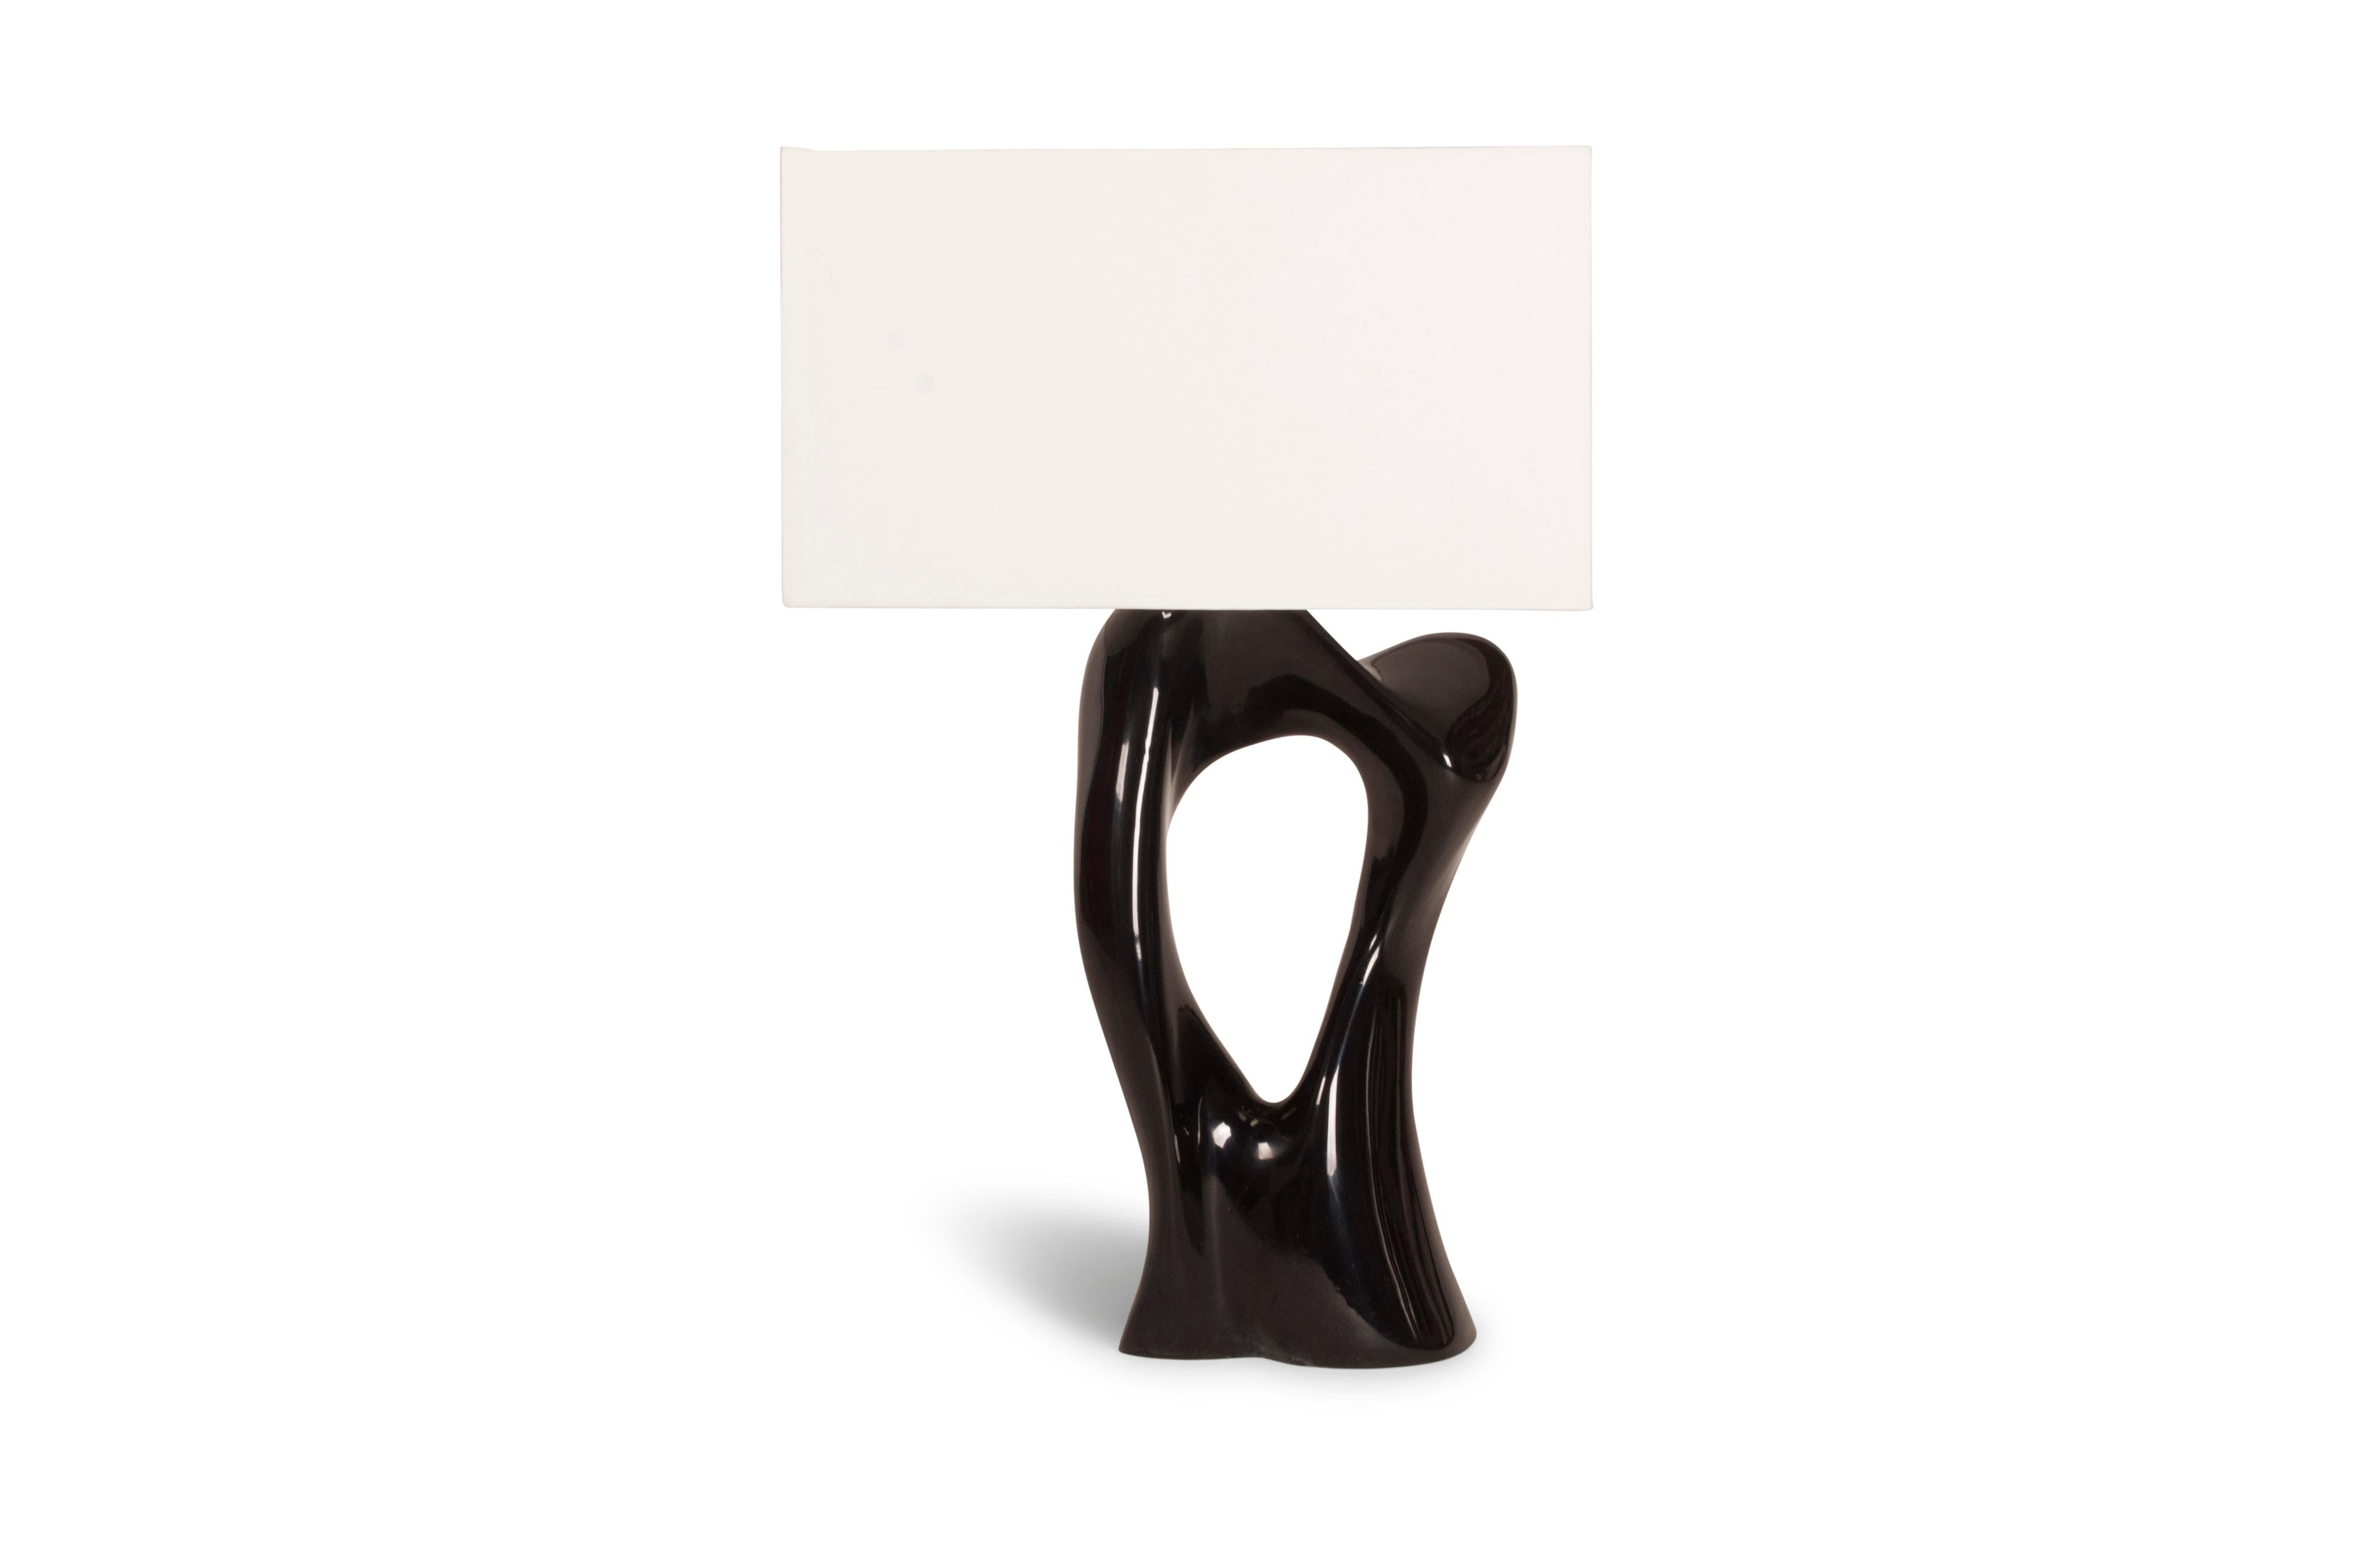 Vesta table lamp, stainless steel finish. Base dimensions: 11